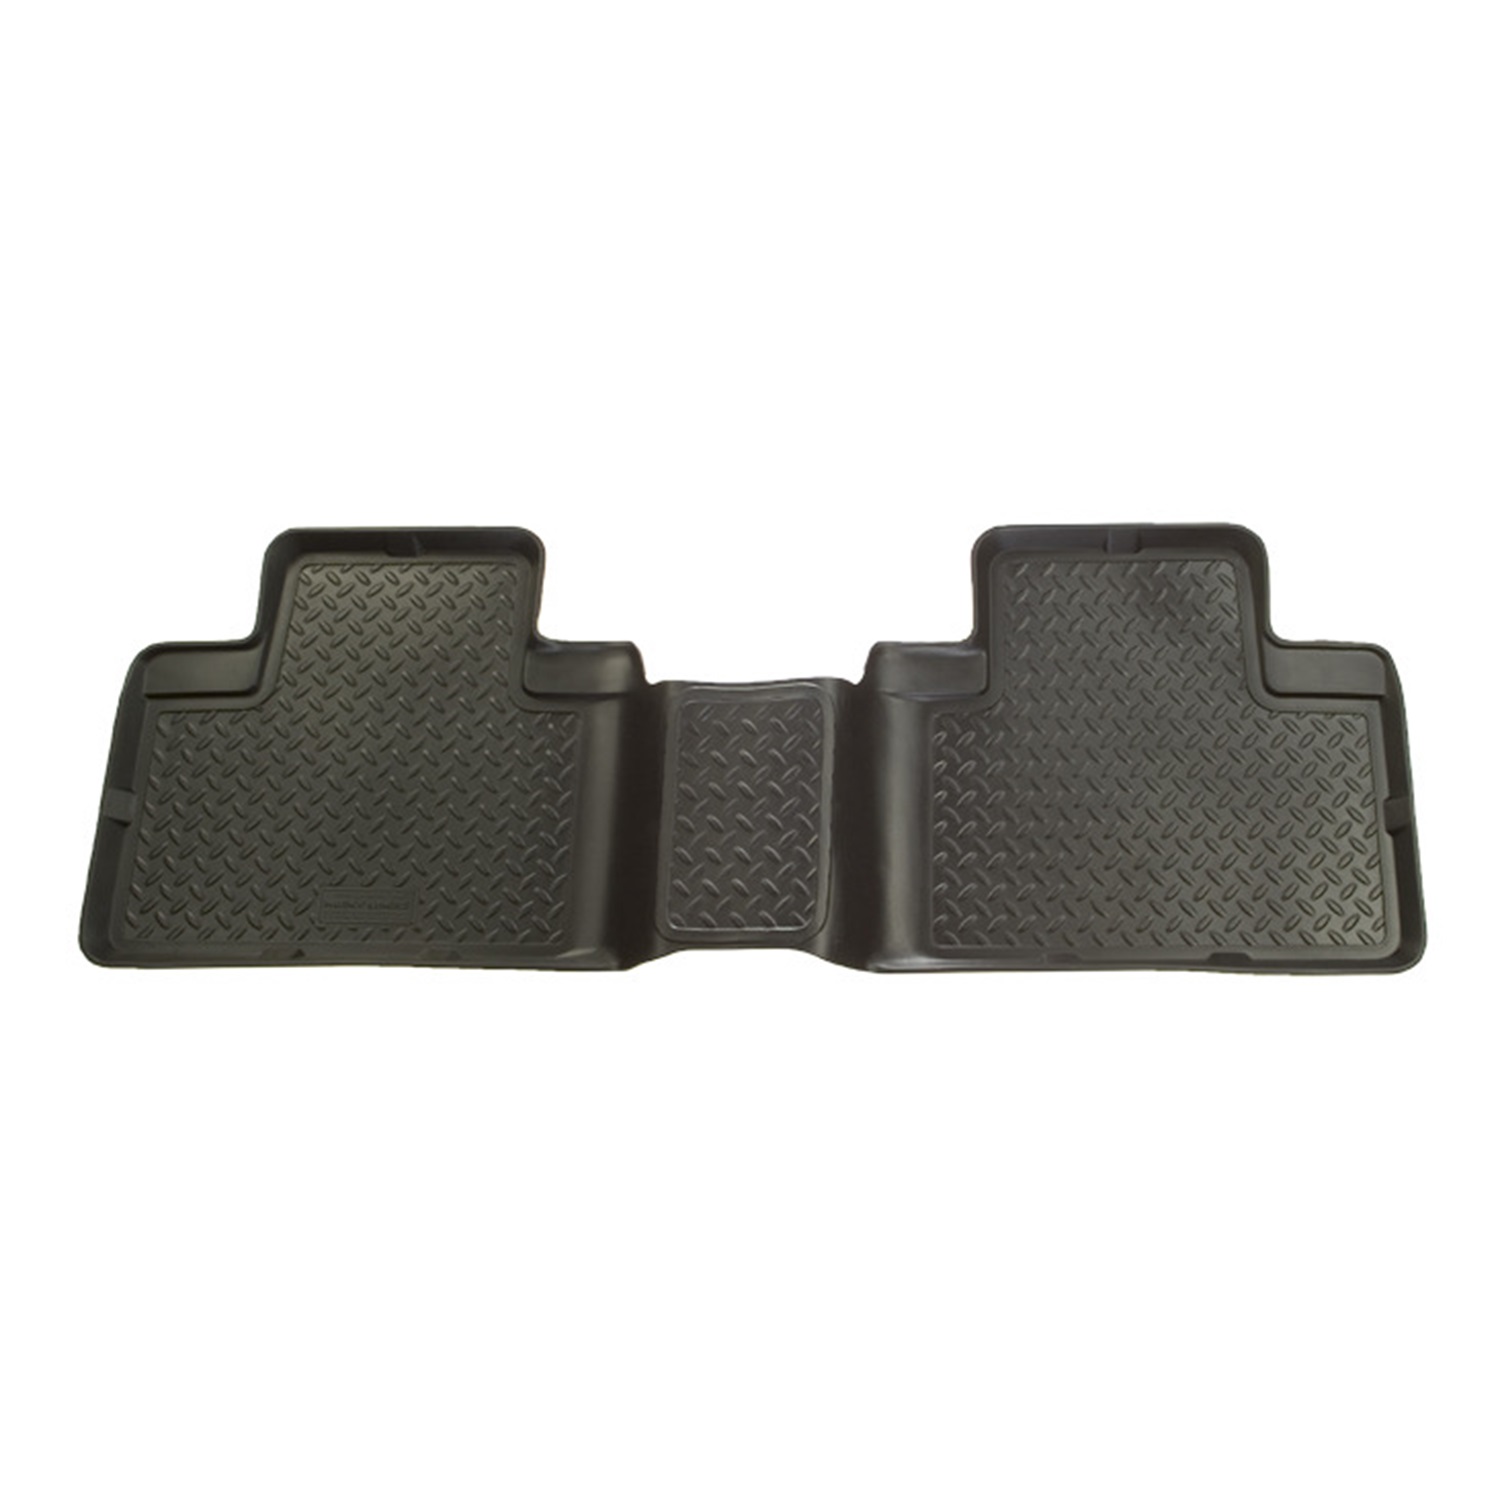 Husky Liners Husky Liners 64061 Classic Style; Floor Liner Fits 98-08 Forester Impreza